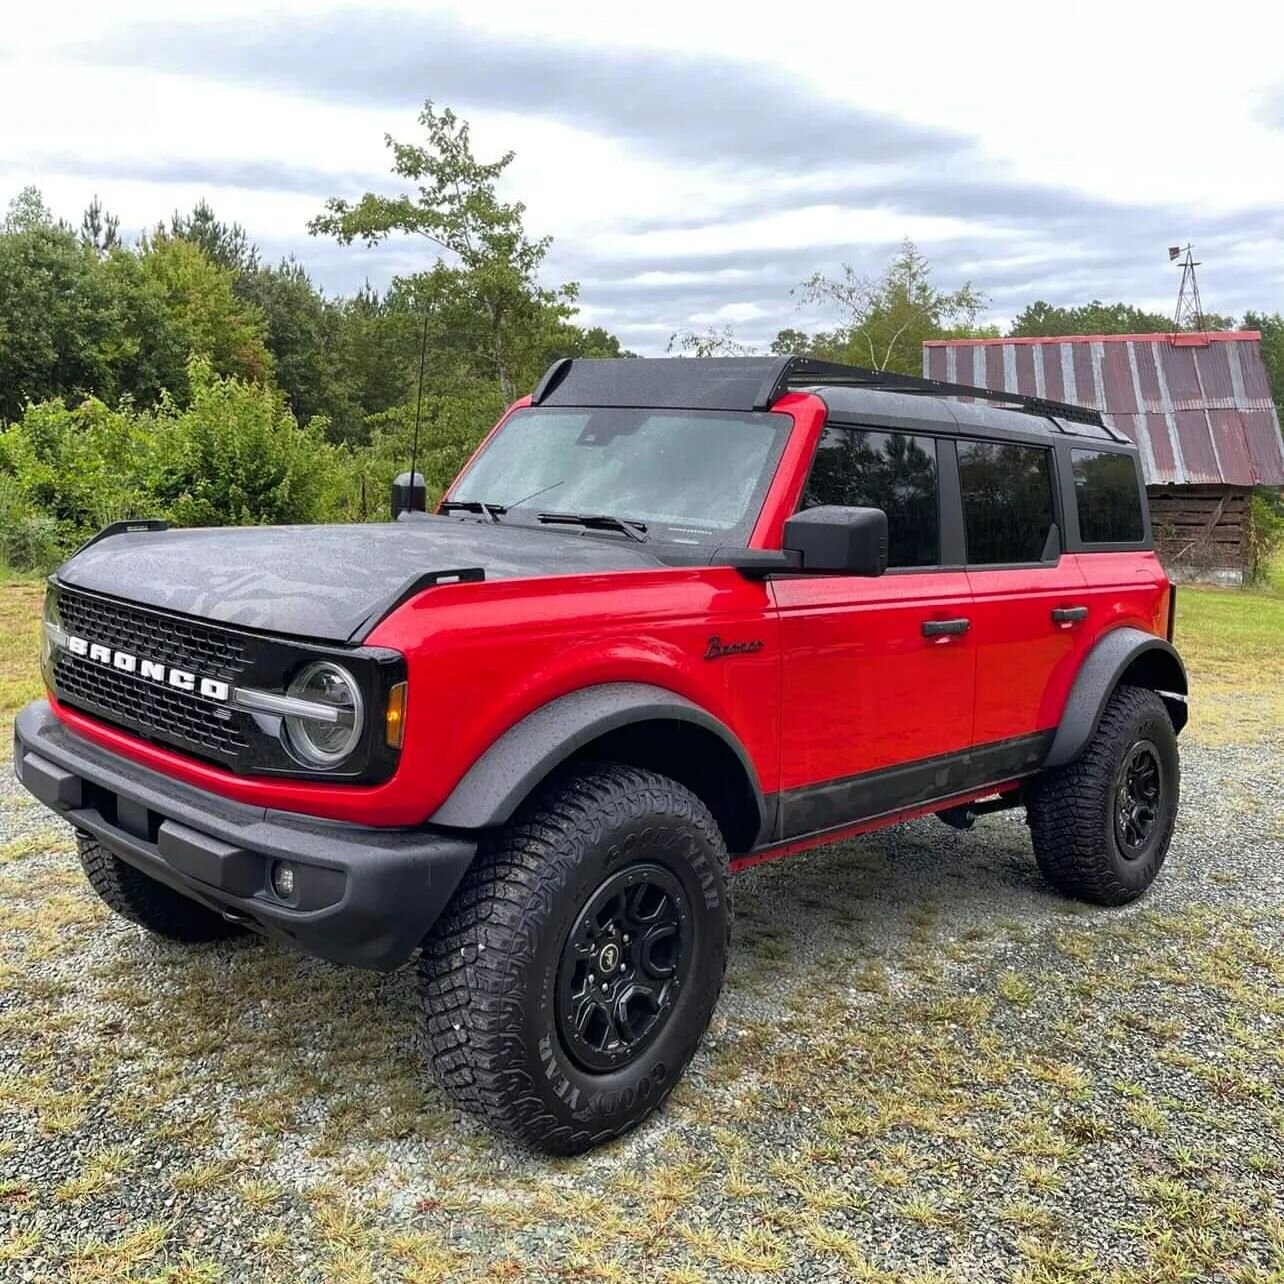 Even seen a cherry red Ford Bronco with touches of MultiCam Black&trade;? Well, now you have, thanks to @eaglesandangelsltd!

Can we just call it Black Cherry? 🍒 🖤 🙌

@multicampattern #Multicampattern #multicamvinyl #multicamblack #MultiCamBlack&t